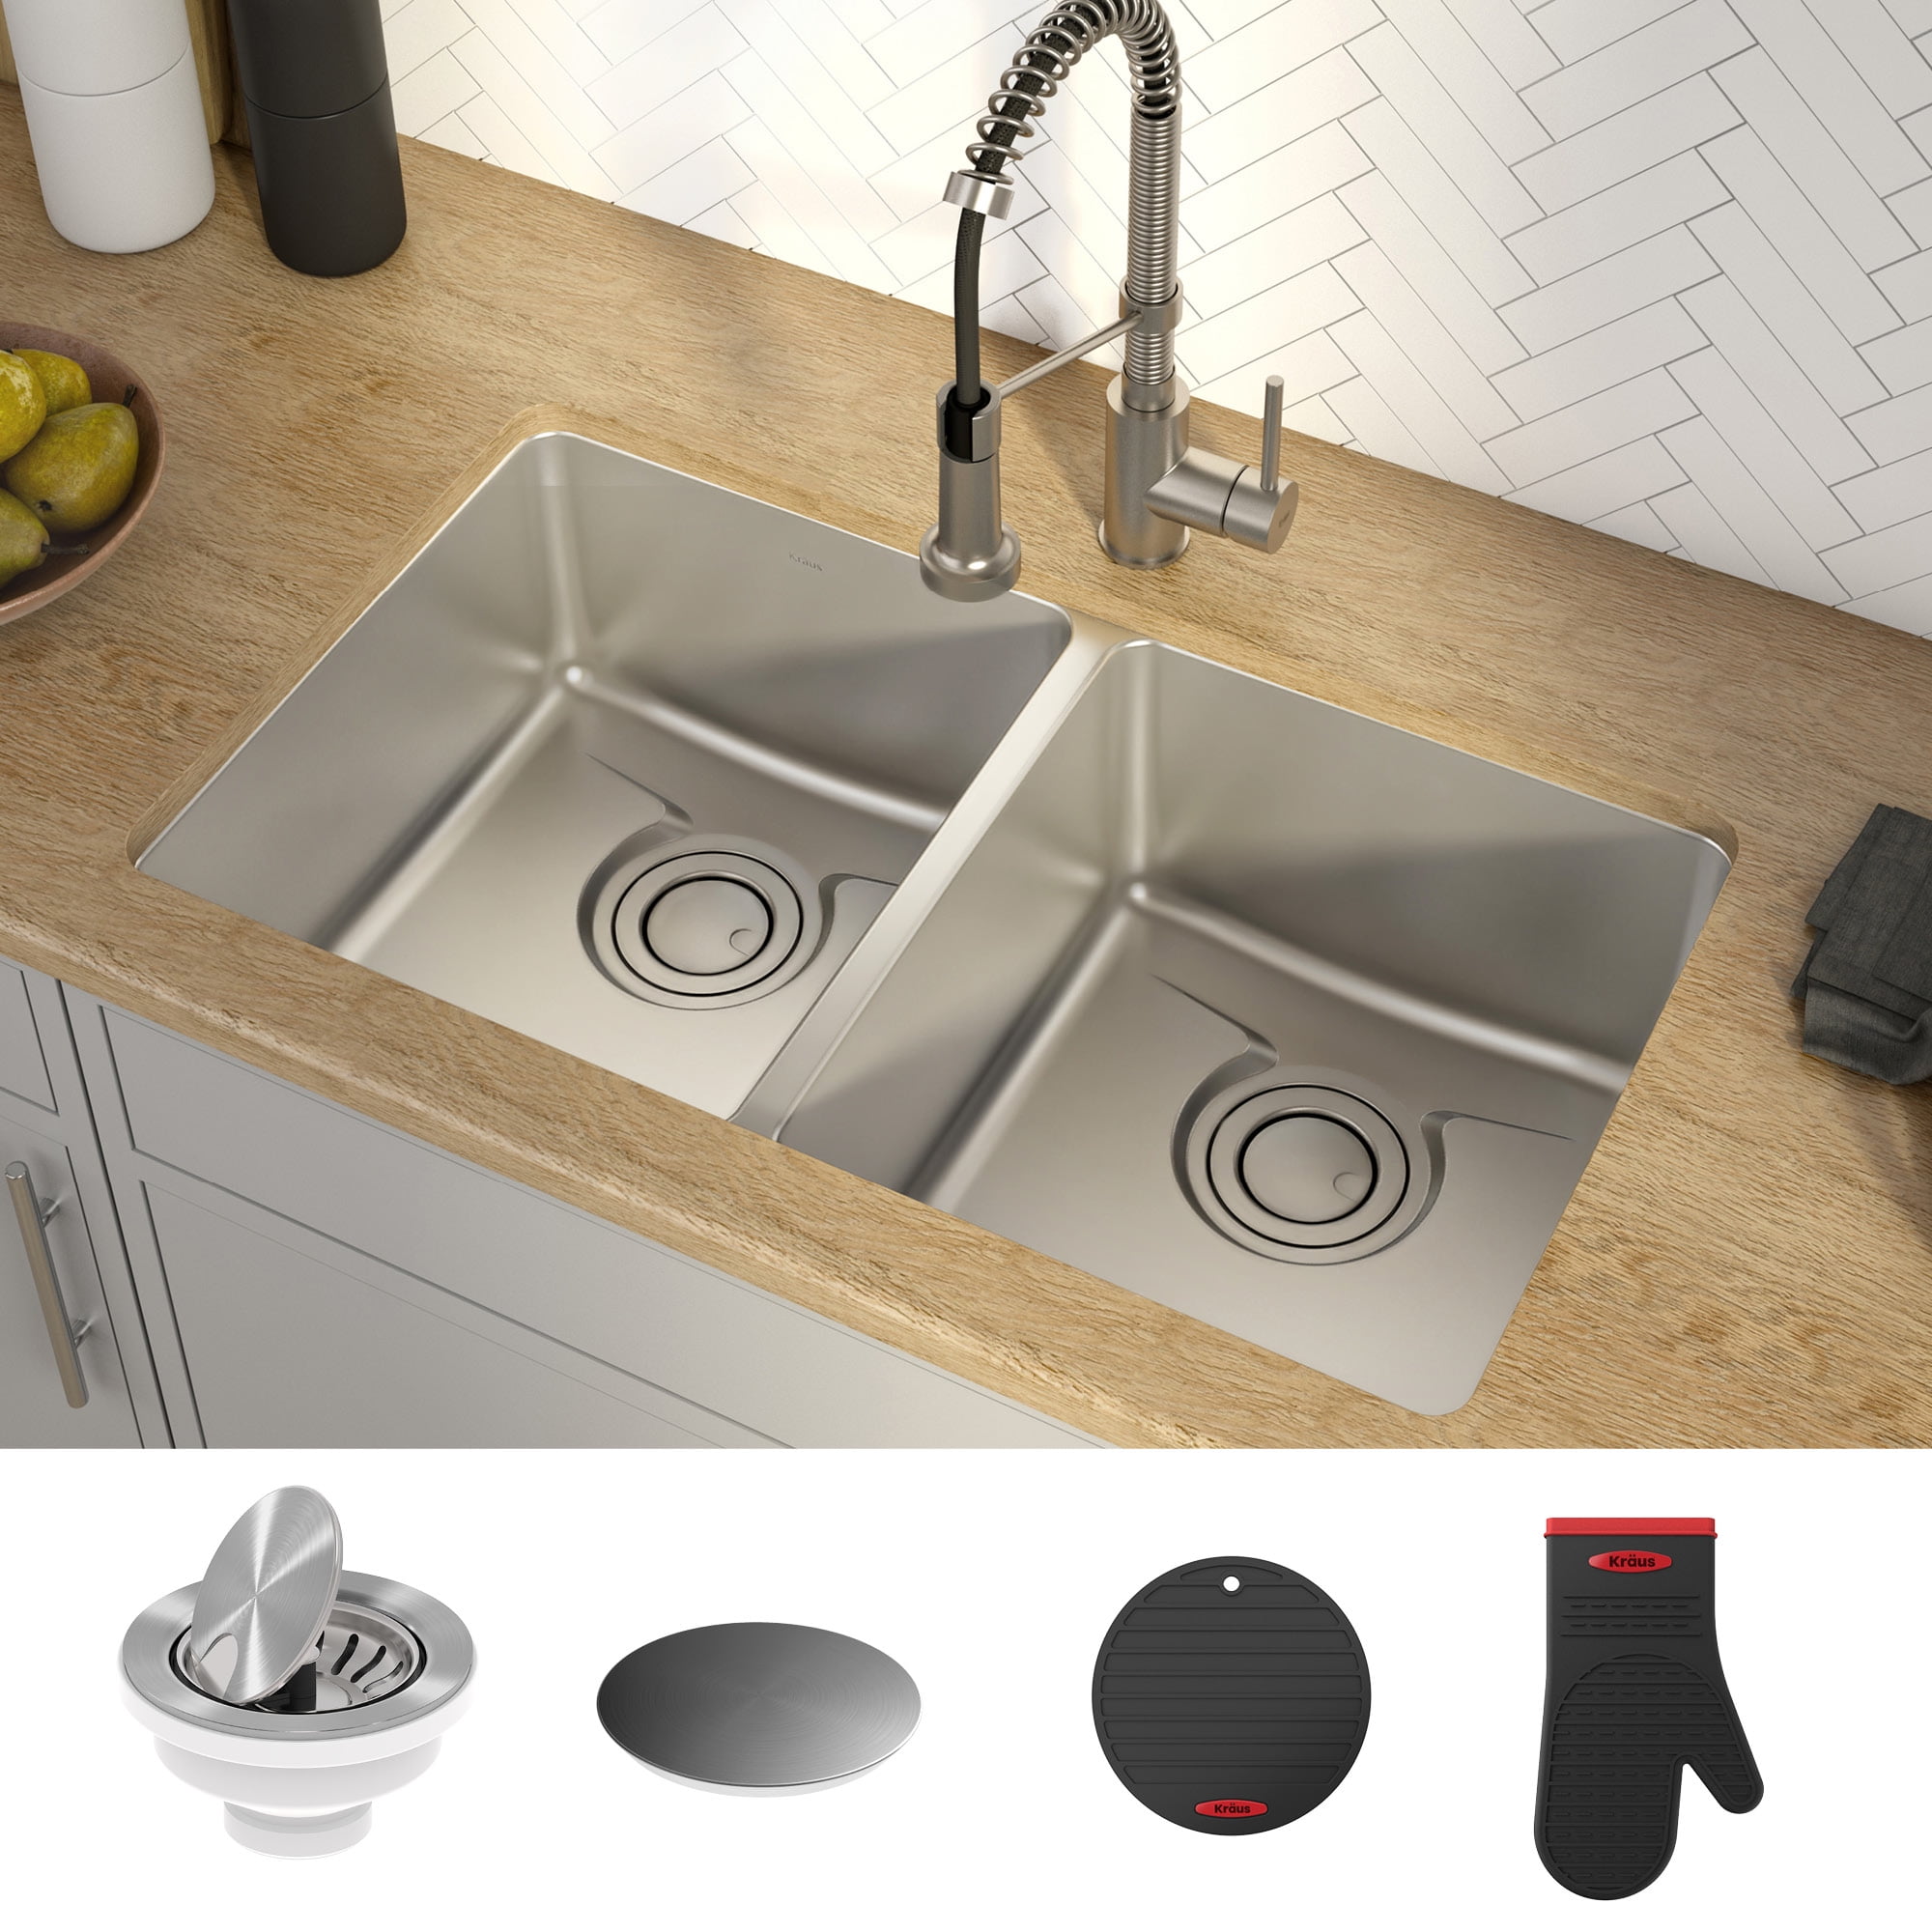 Details about   18-Gauge New Stainless Steel Undermount 32.5" 50/50 Double Bowl Kitchen Sink! 